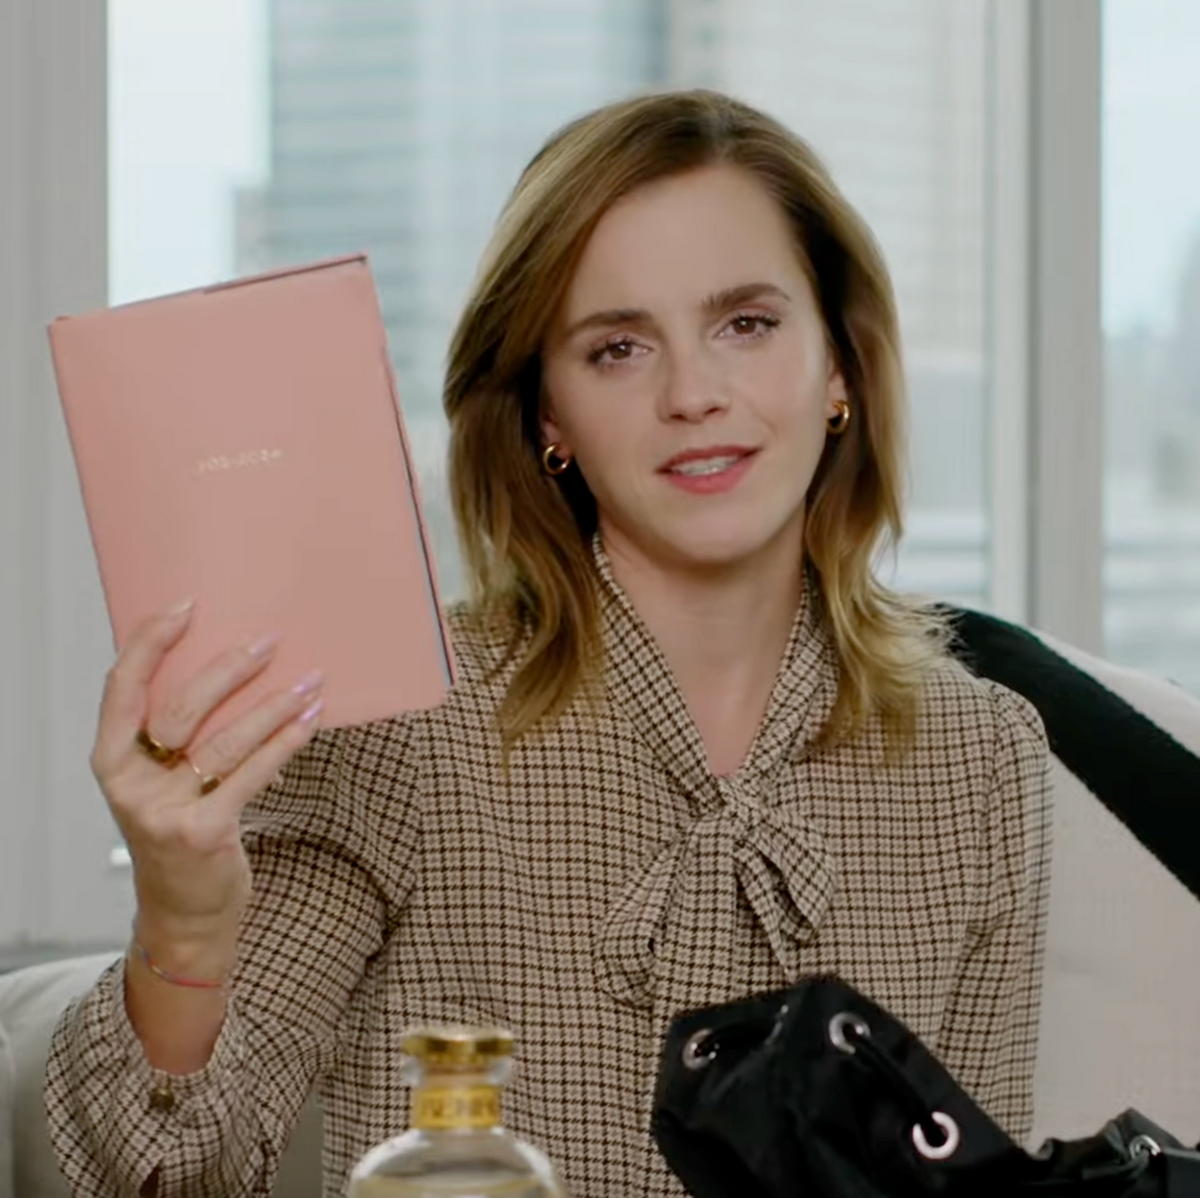 emma watson in the bag daily journal prompts